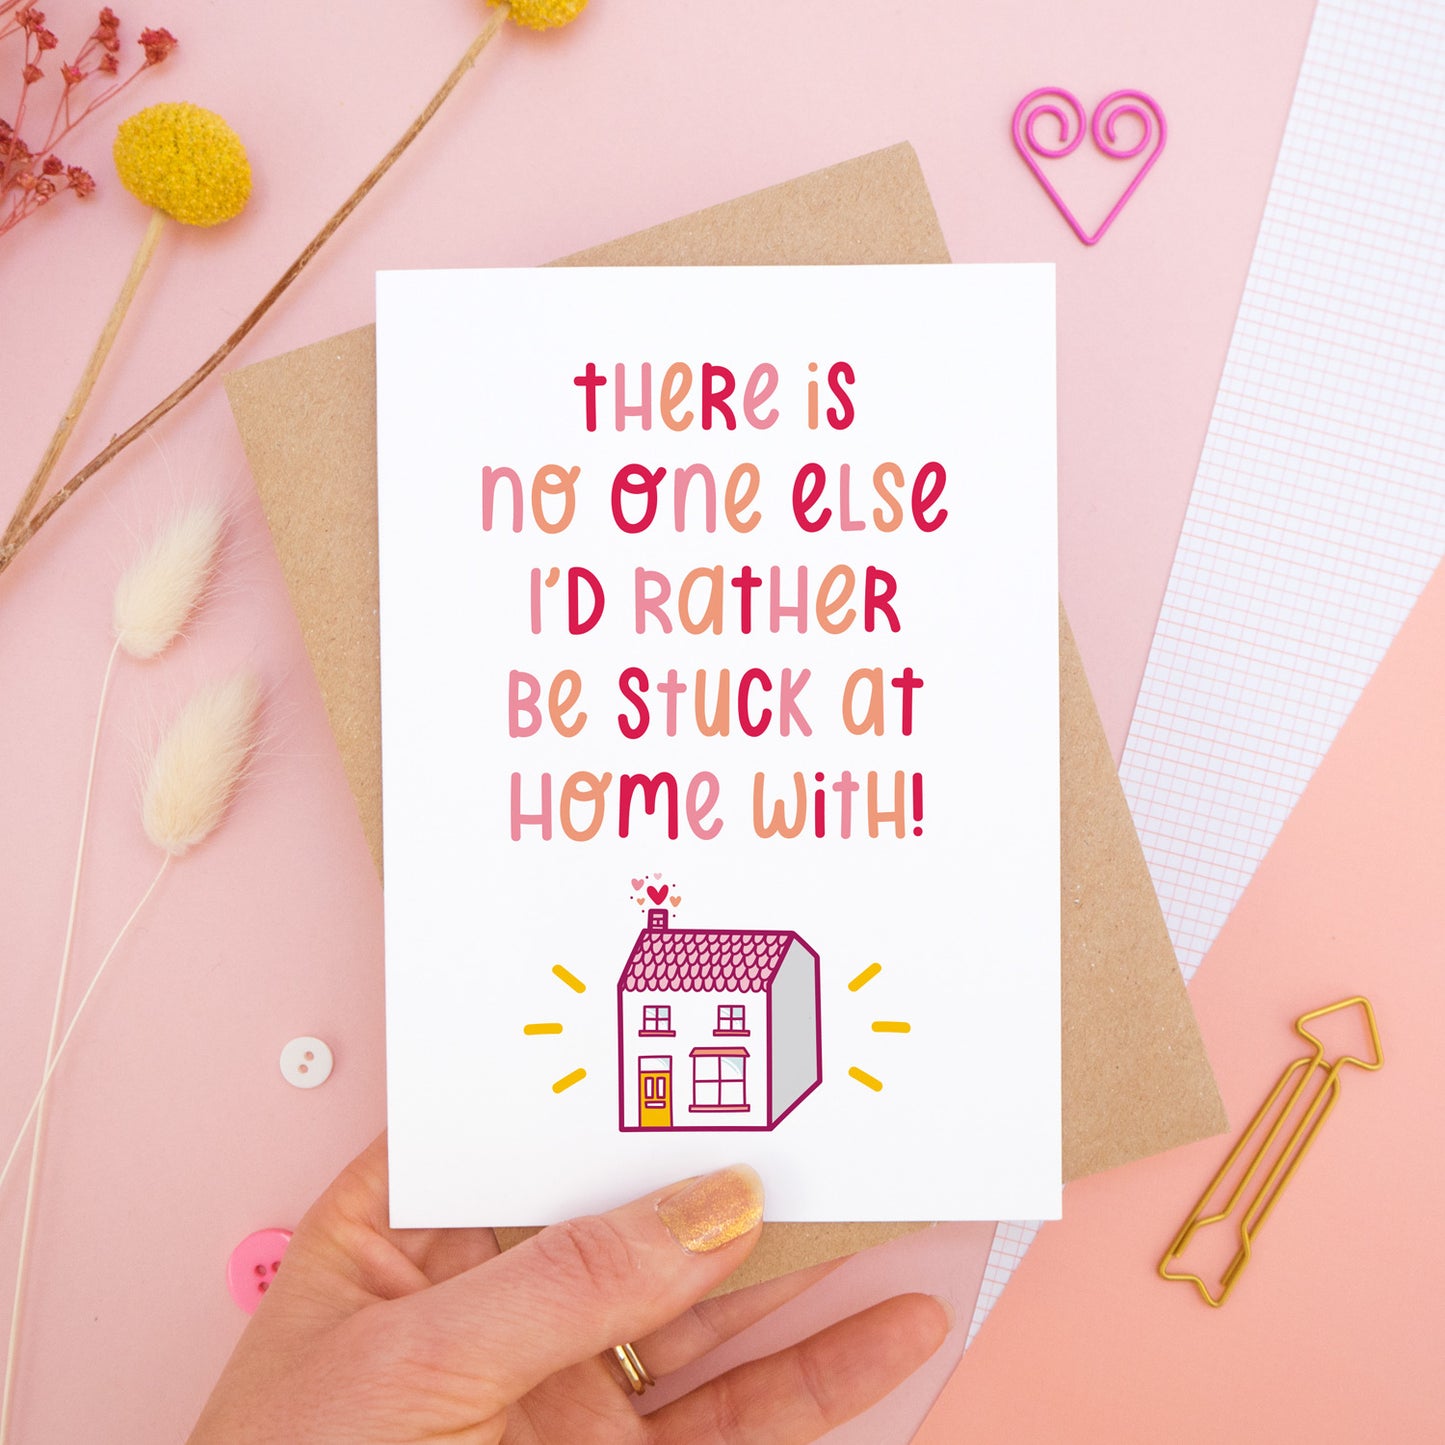 The 'stuck at home with you' card photographed on a pink background with dried flowers, buttons and paper clips as props. The card itself is being held above the scene.